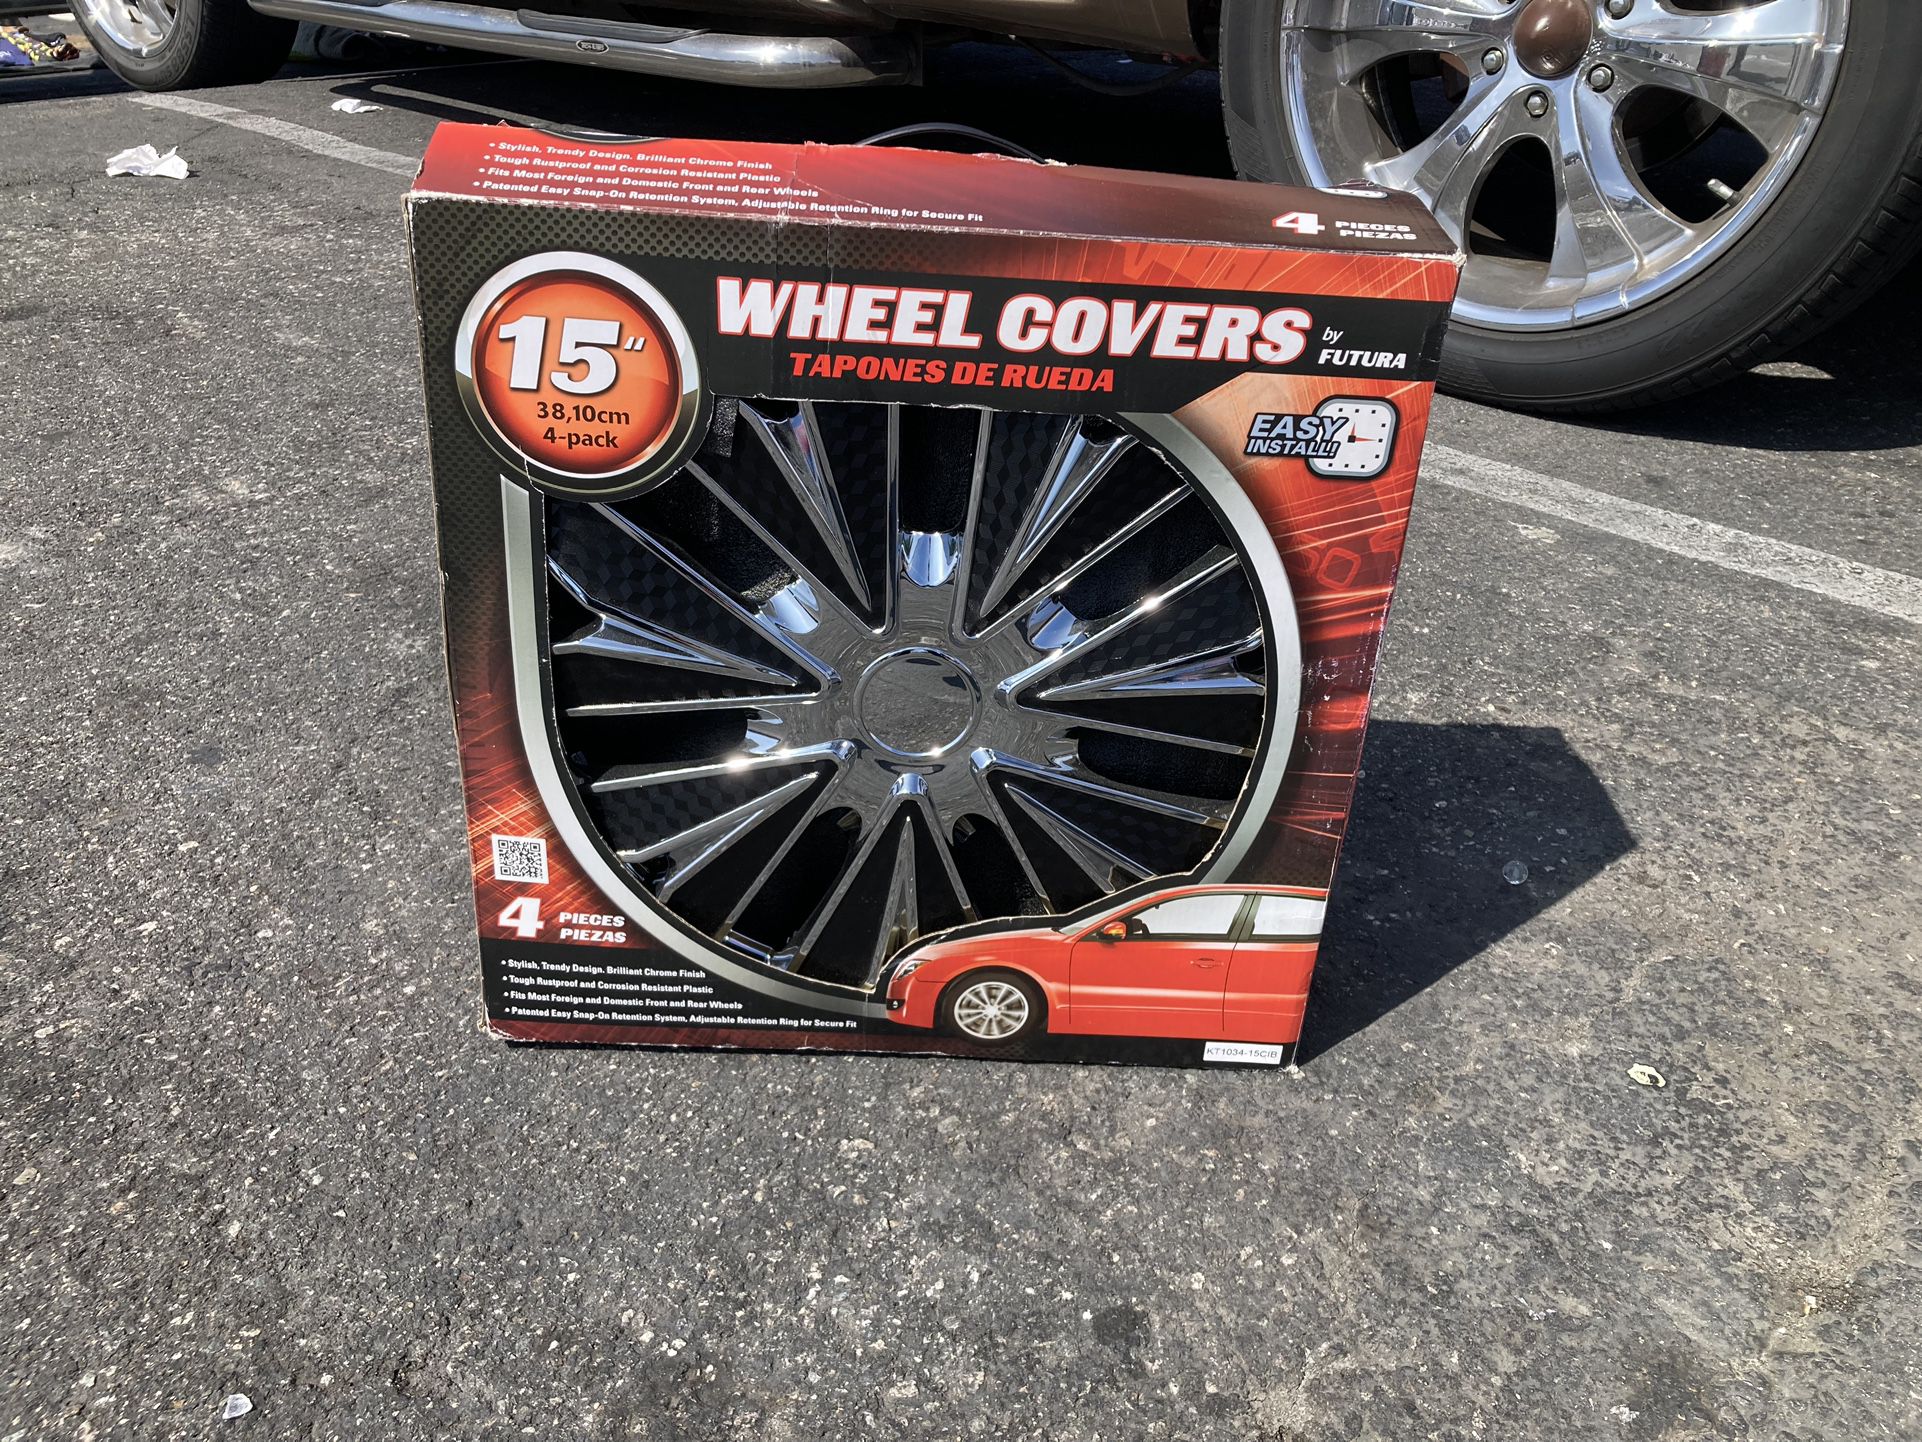 Black and Chome Wheel Covers 15"